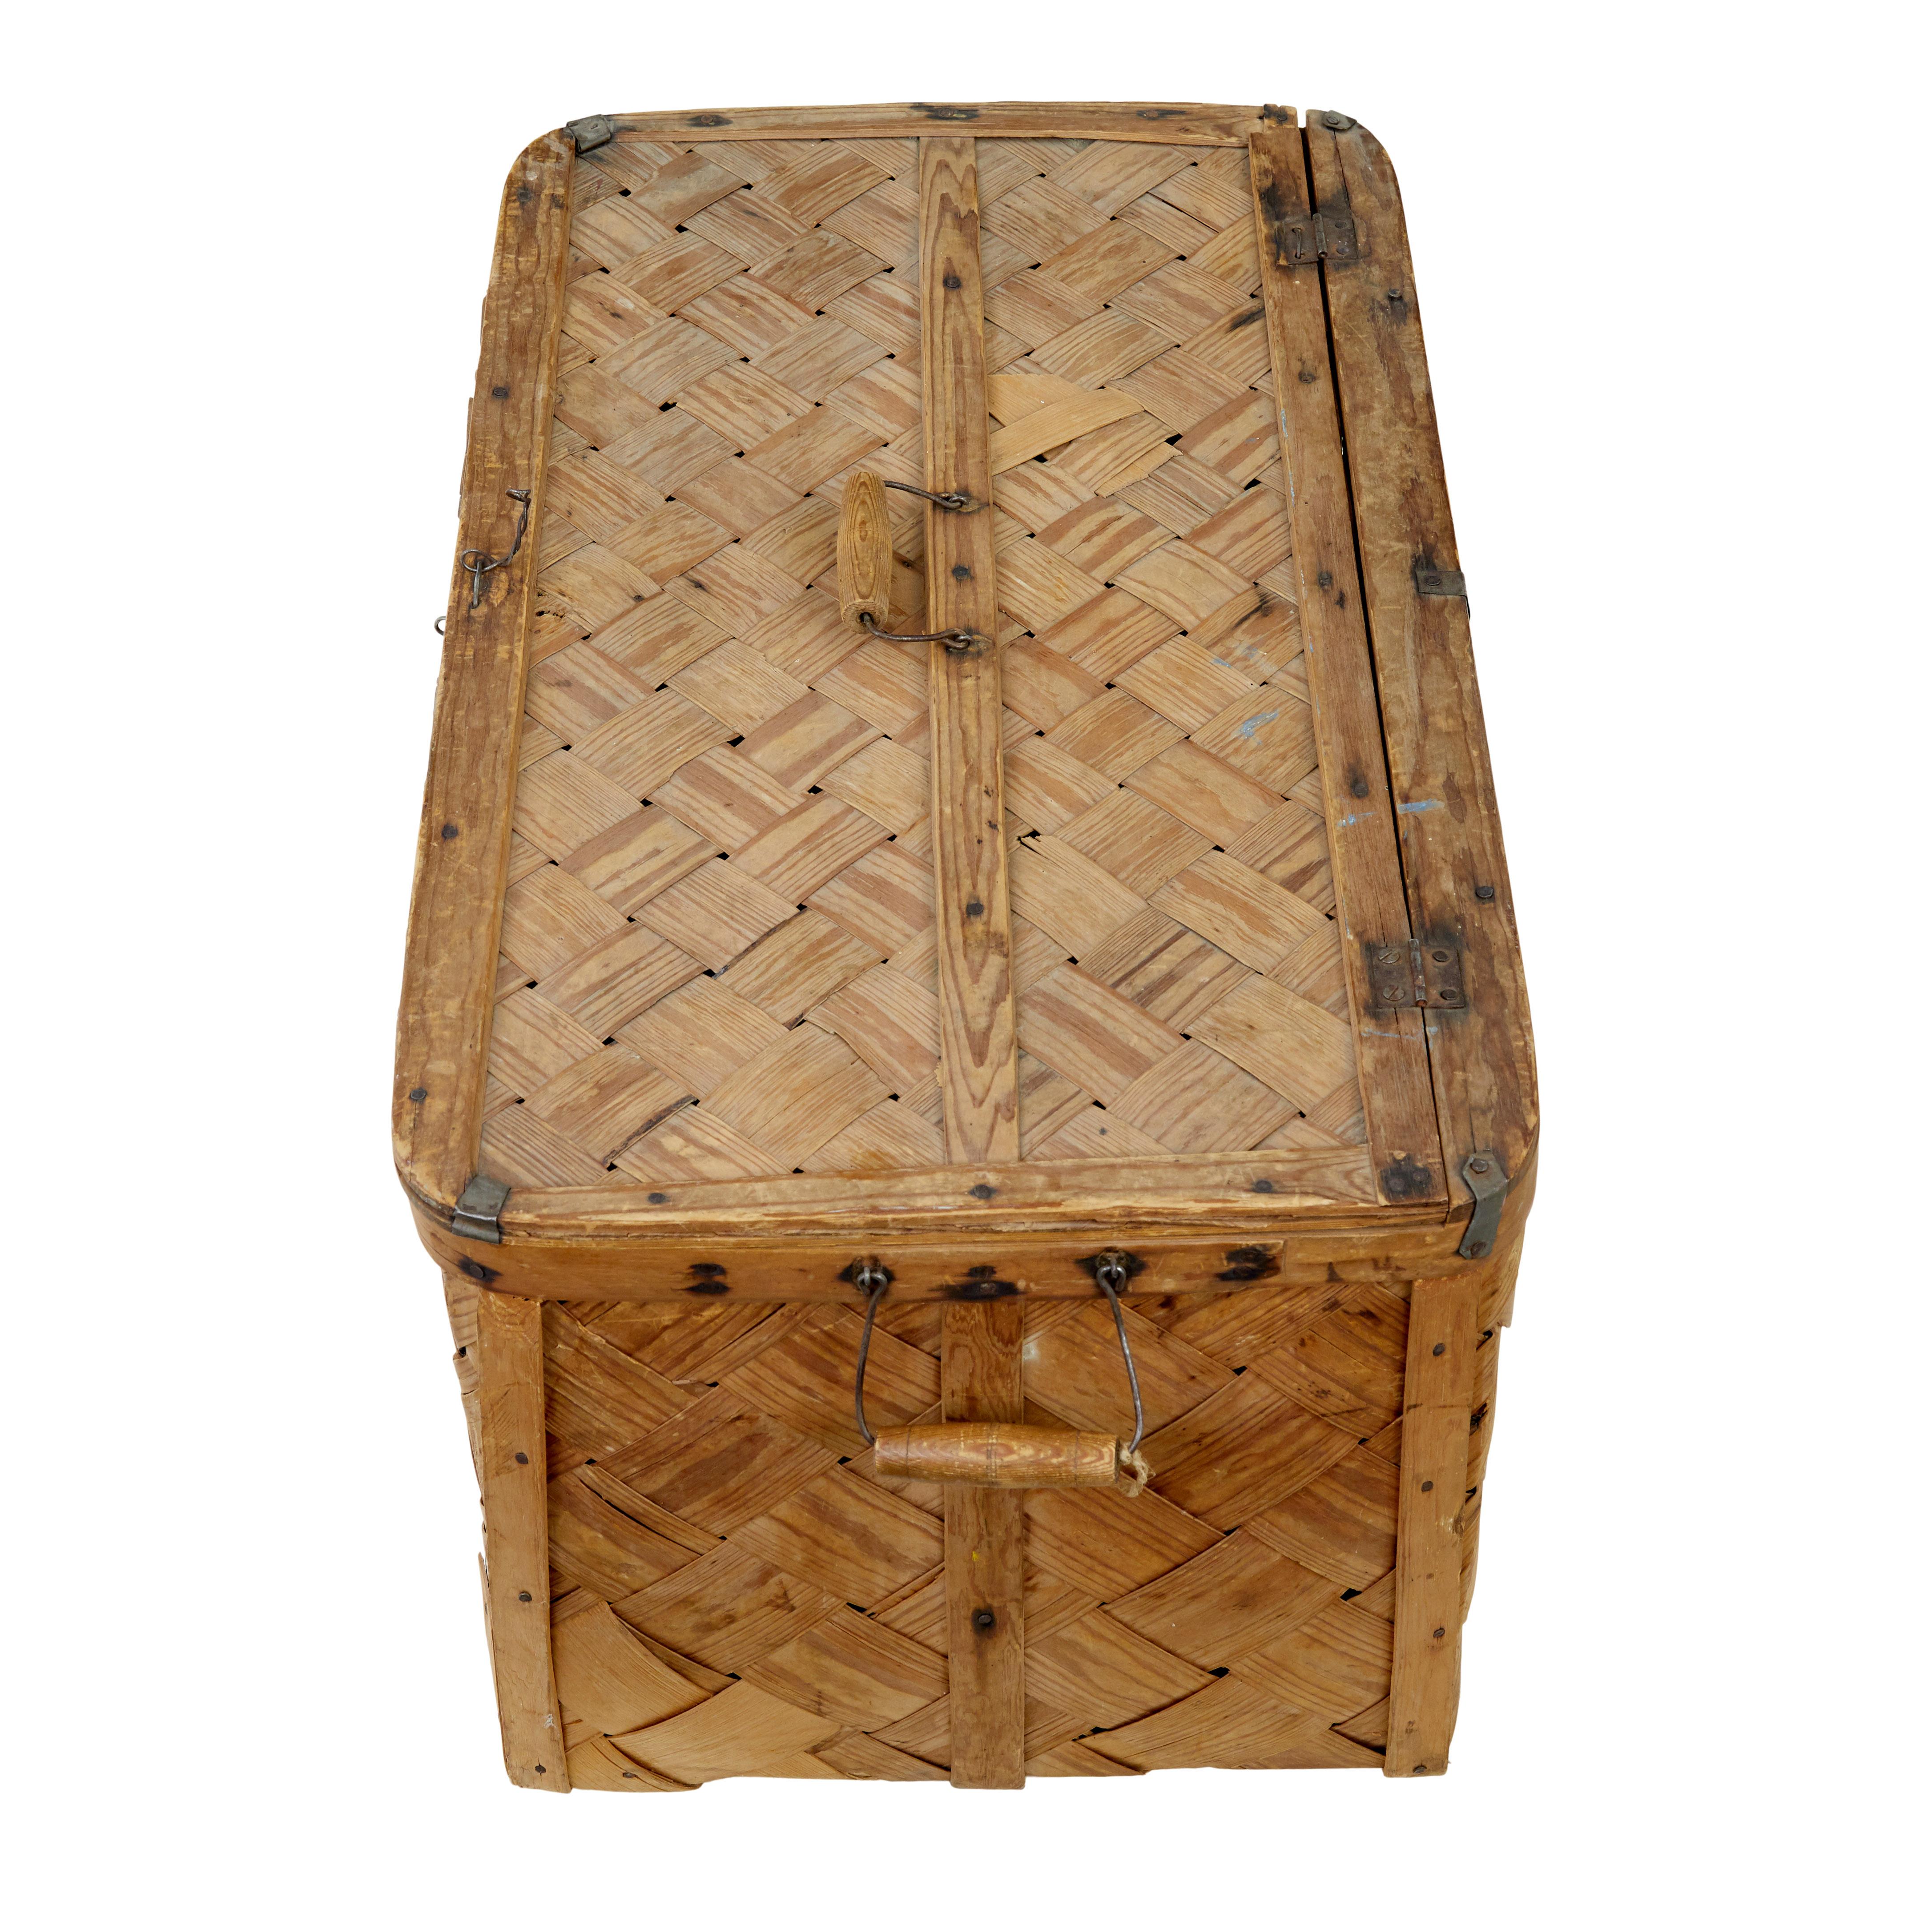 Swedish 19th century woven pine basket circa 1890.

Beautiful rustic made pine basket using strips of pine fixed into a pine frame. Complete with original lid.

Fitted with a handle each side and 1 to the lid. Ideal for its original use.

Very minor